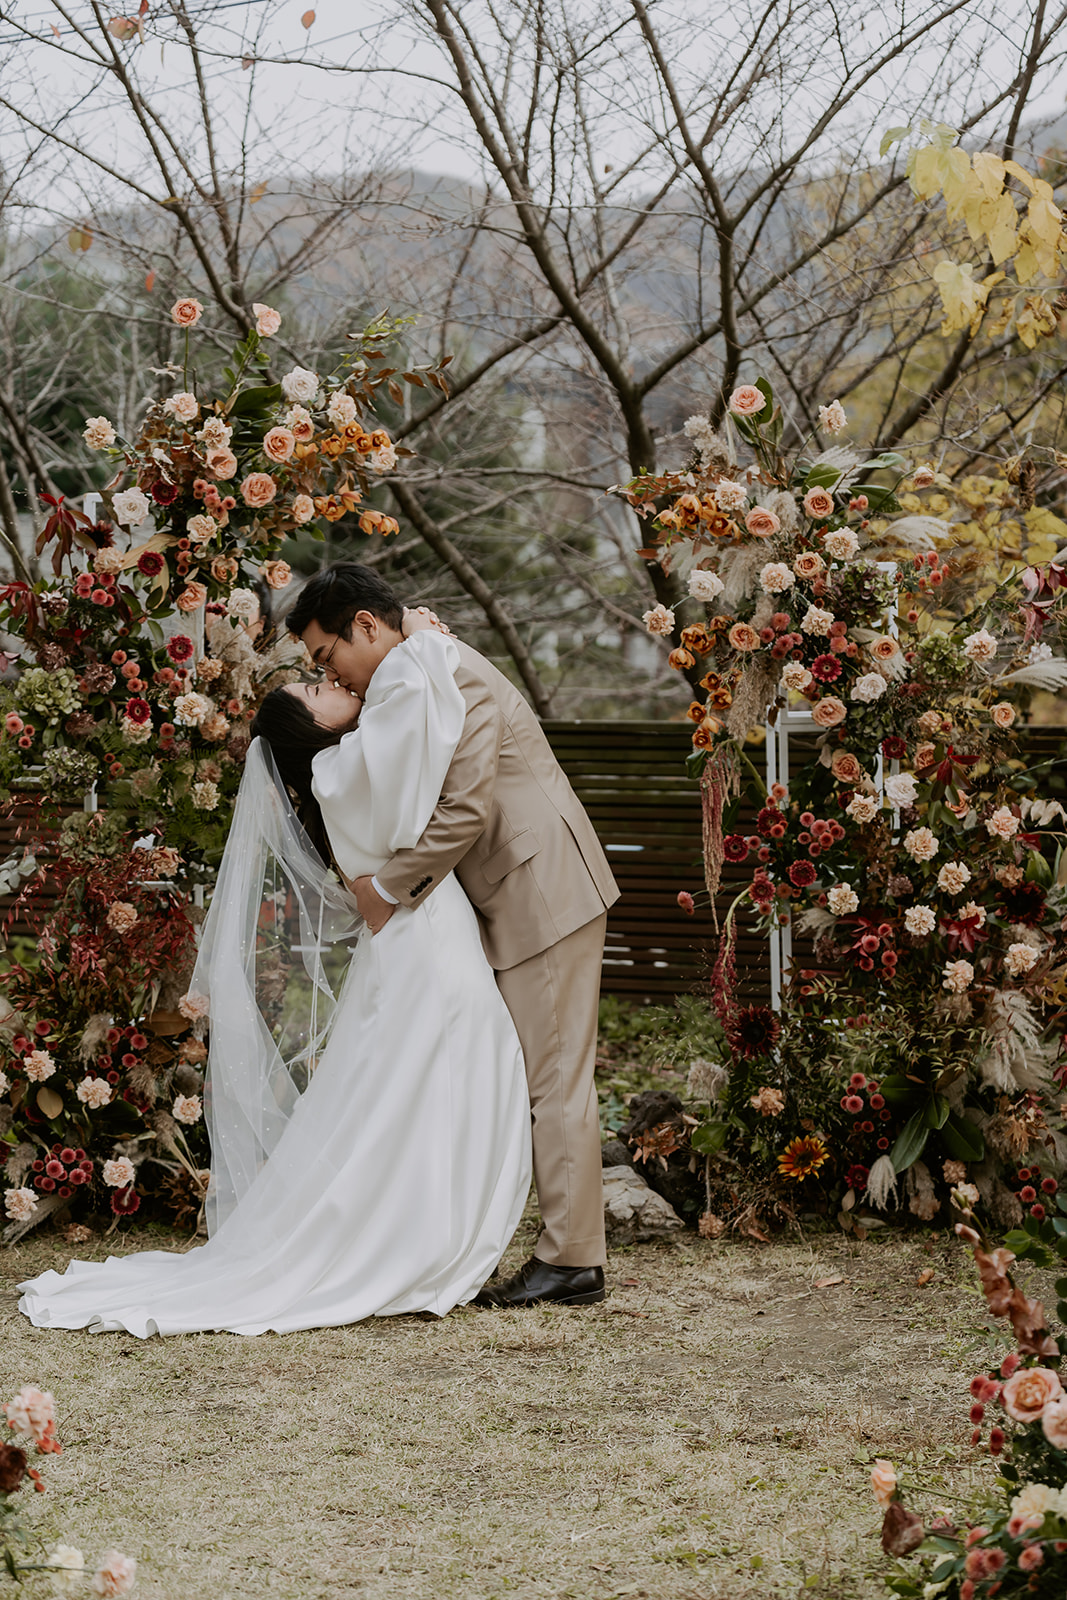 A bride and groom kissing under a floral arch in a garden setting, surrounded by colorful flowers and lush greenery.